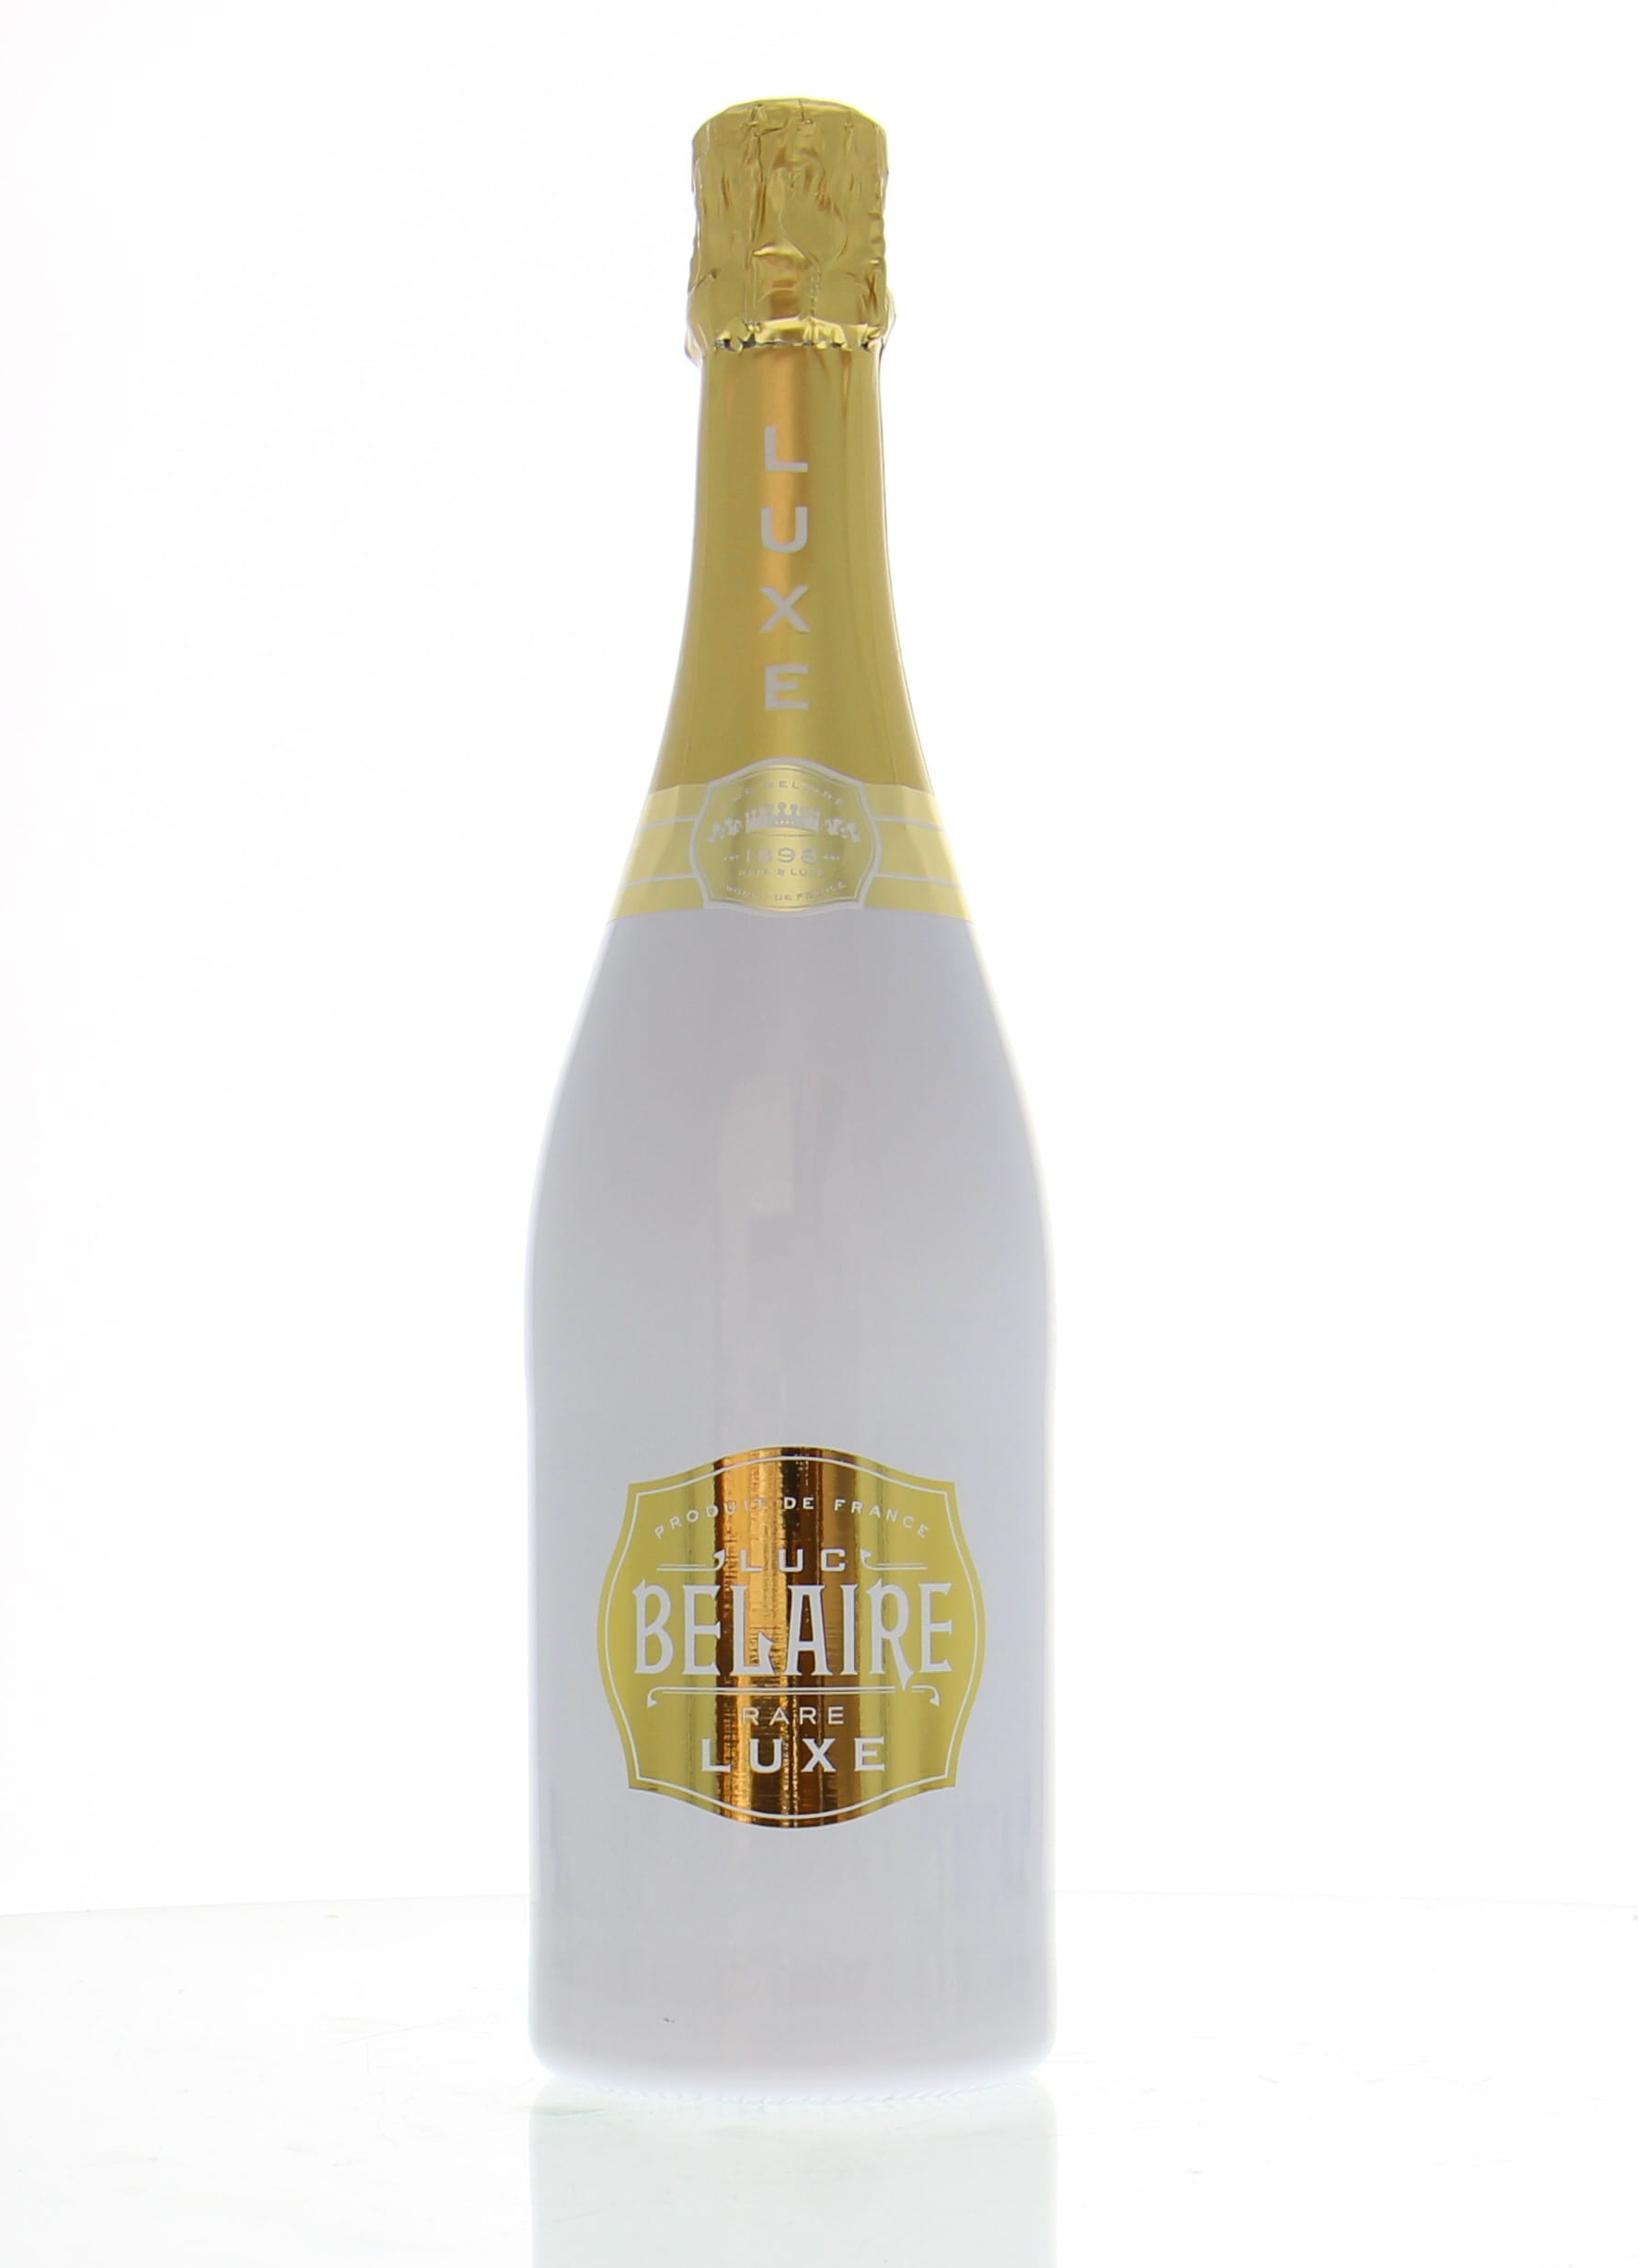 Luc Belaire - Rare Luxe NV Perfect